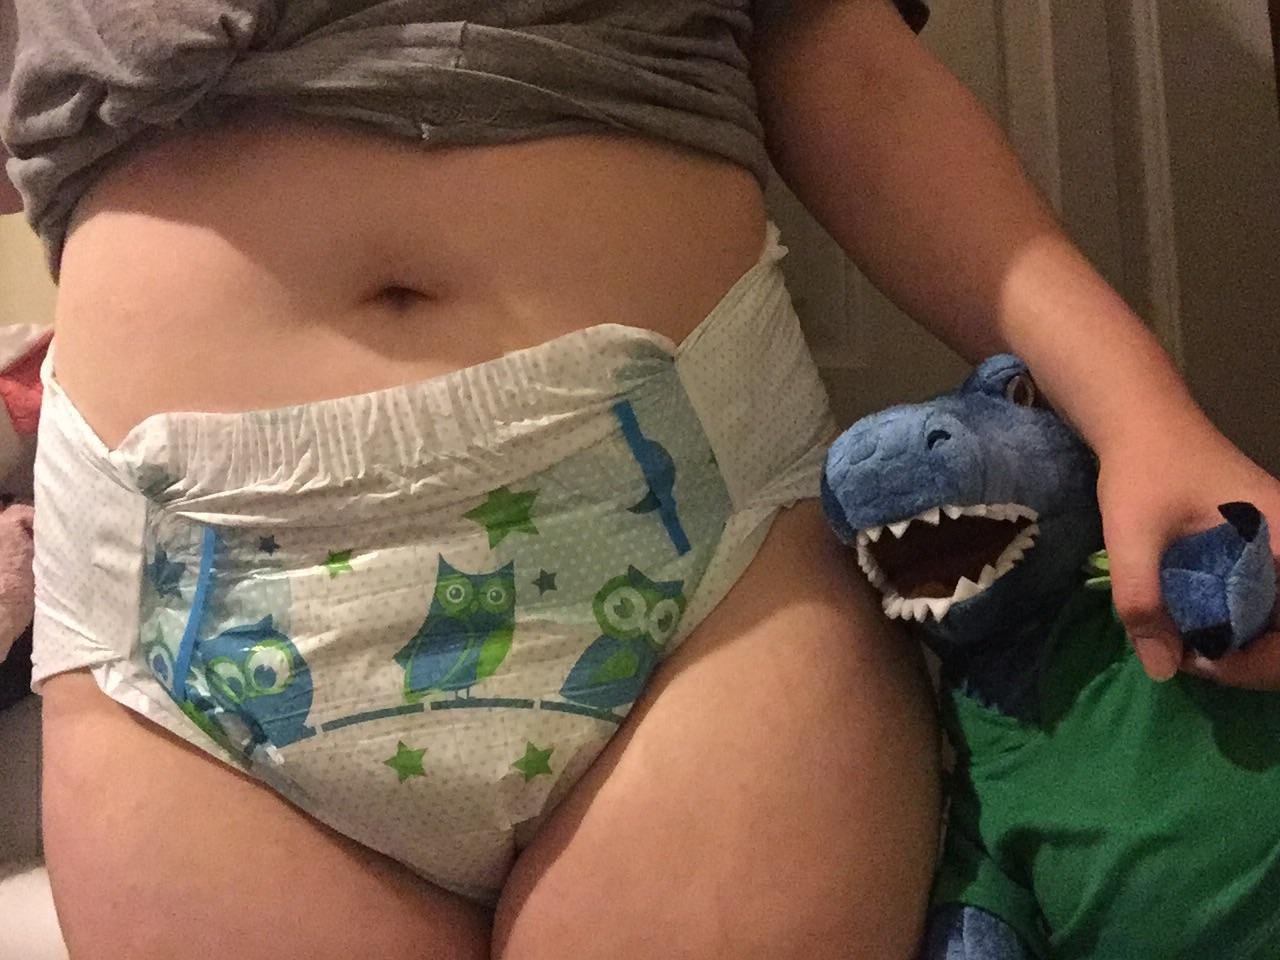 This lil girl is up way past her bedtime - but she is so happy to be diapered again! This is my first time trying the Kiddos (or any single taped diaper, actually) and I’m in love with them so far! Now, Chomper and I are off to bed, night night :)